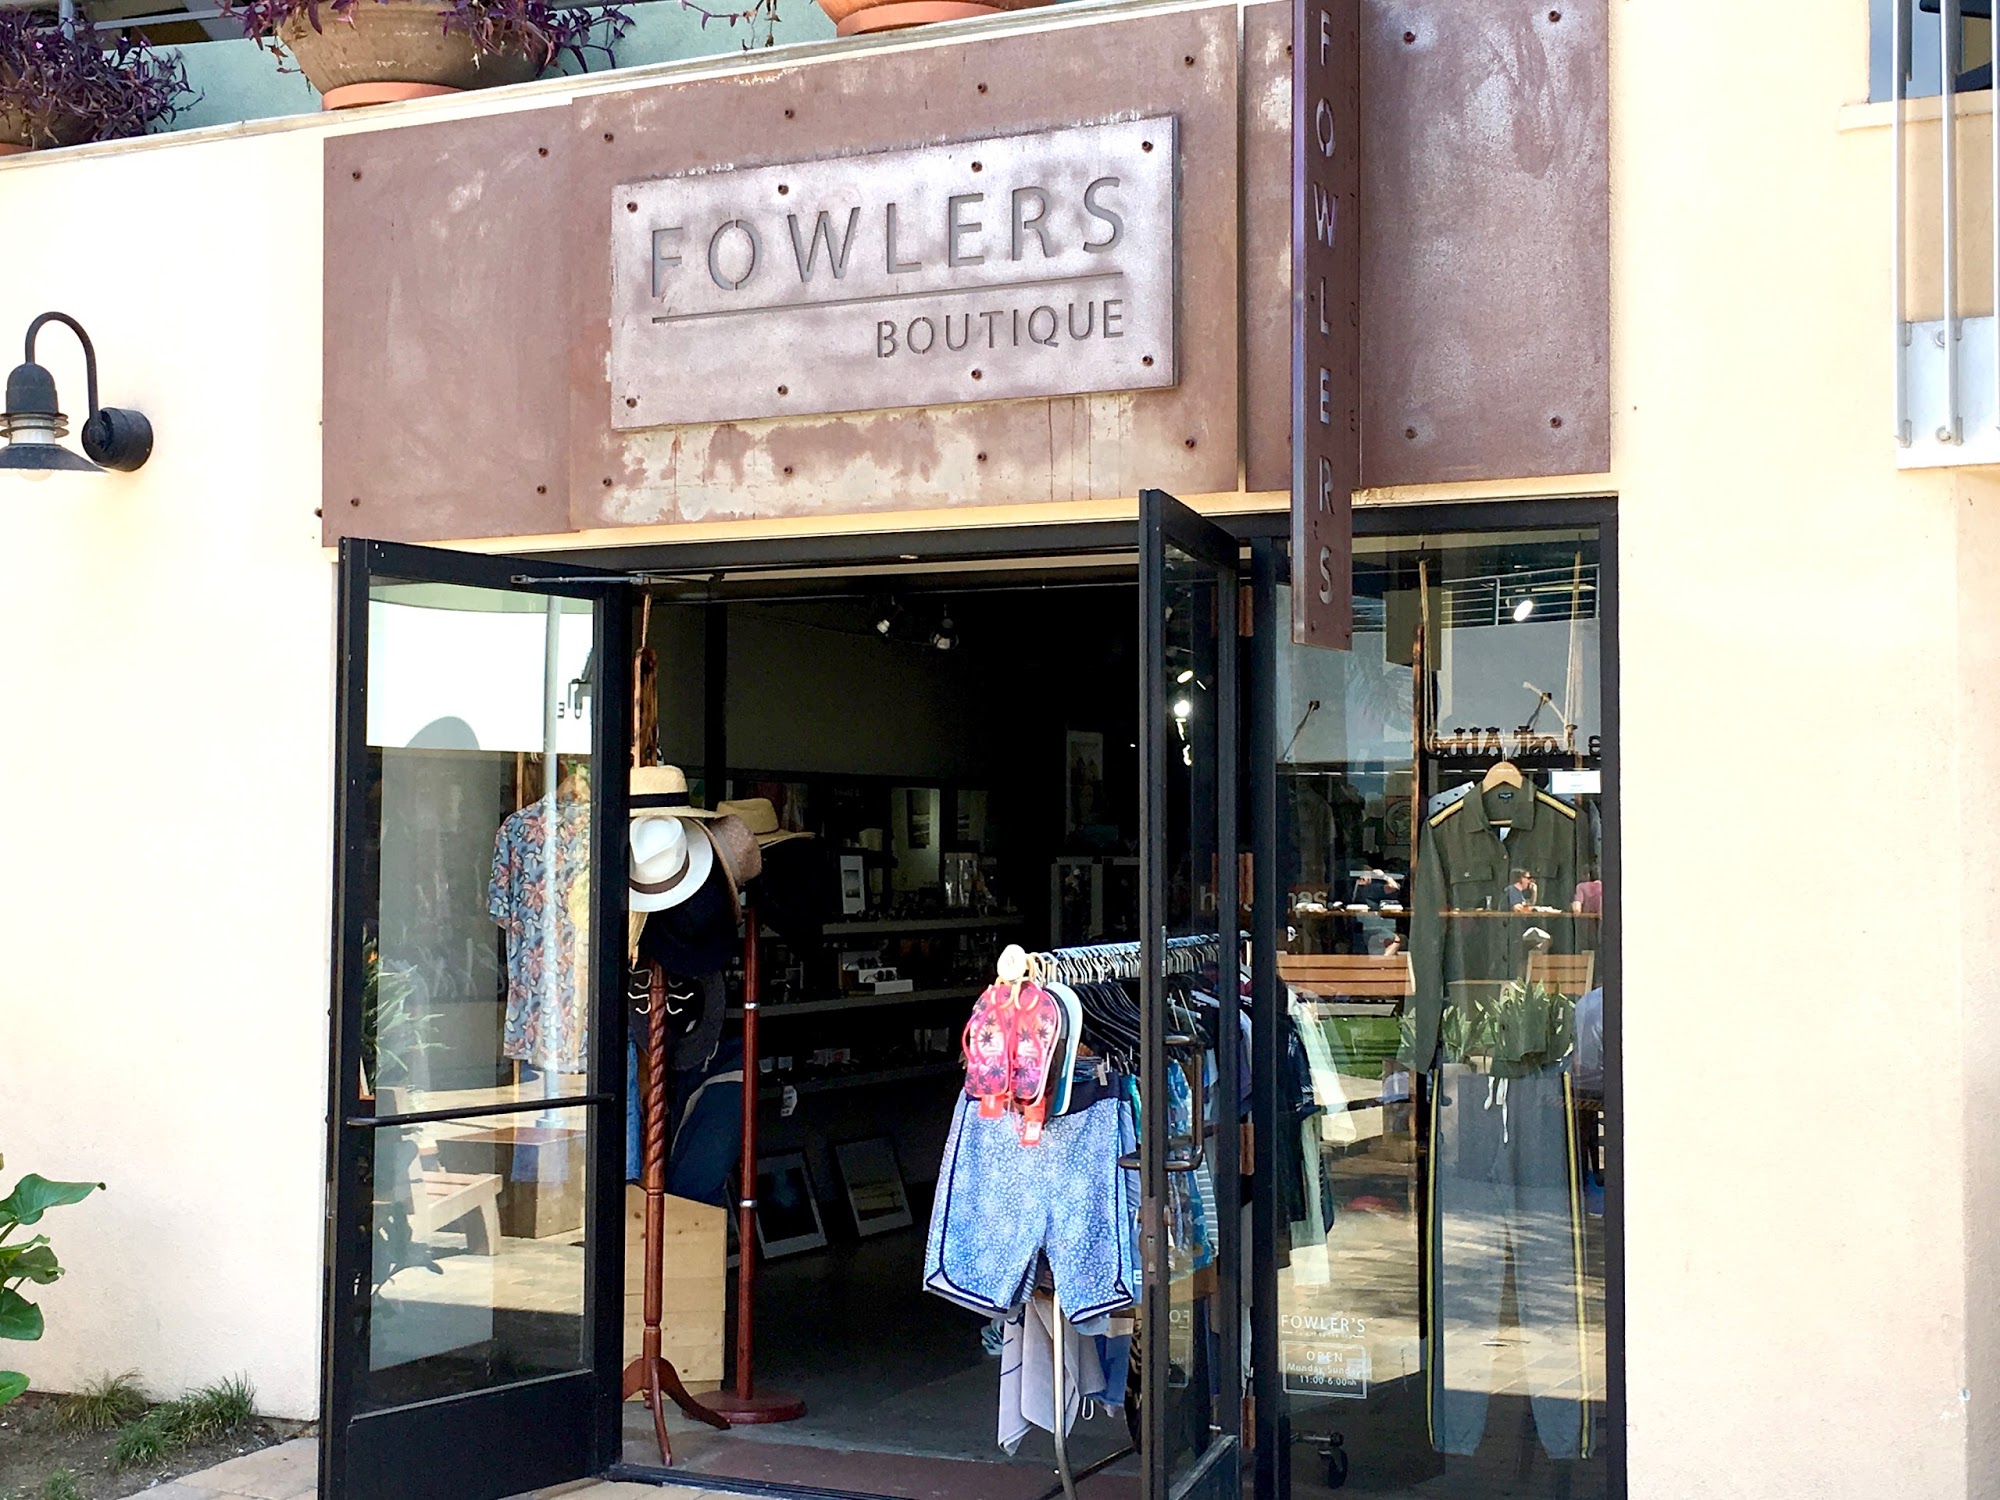 Fowlers Boutique